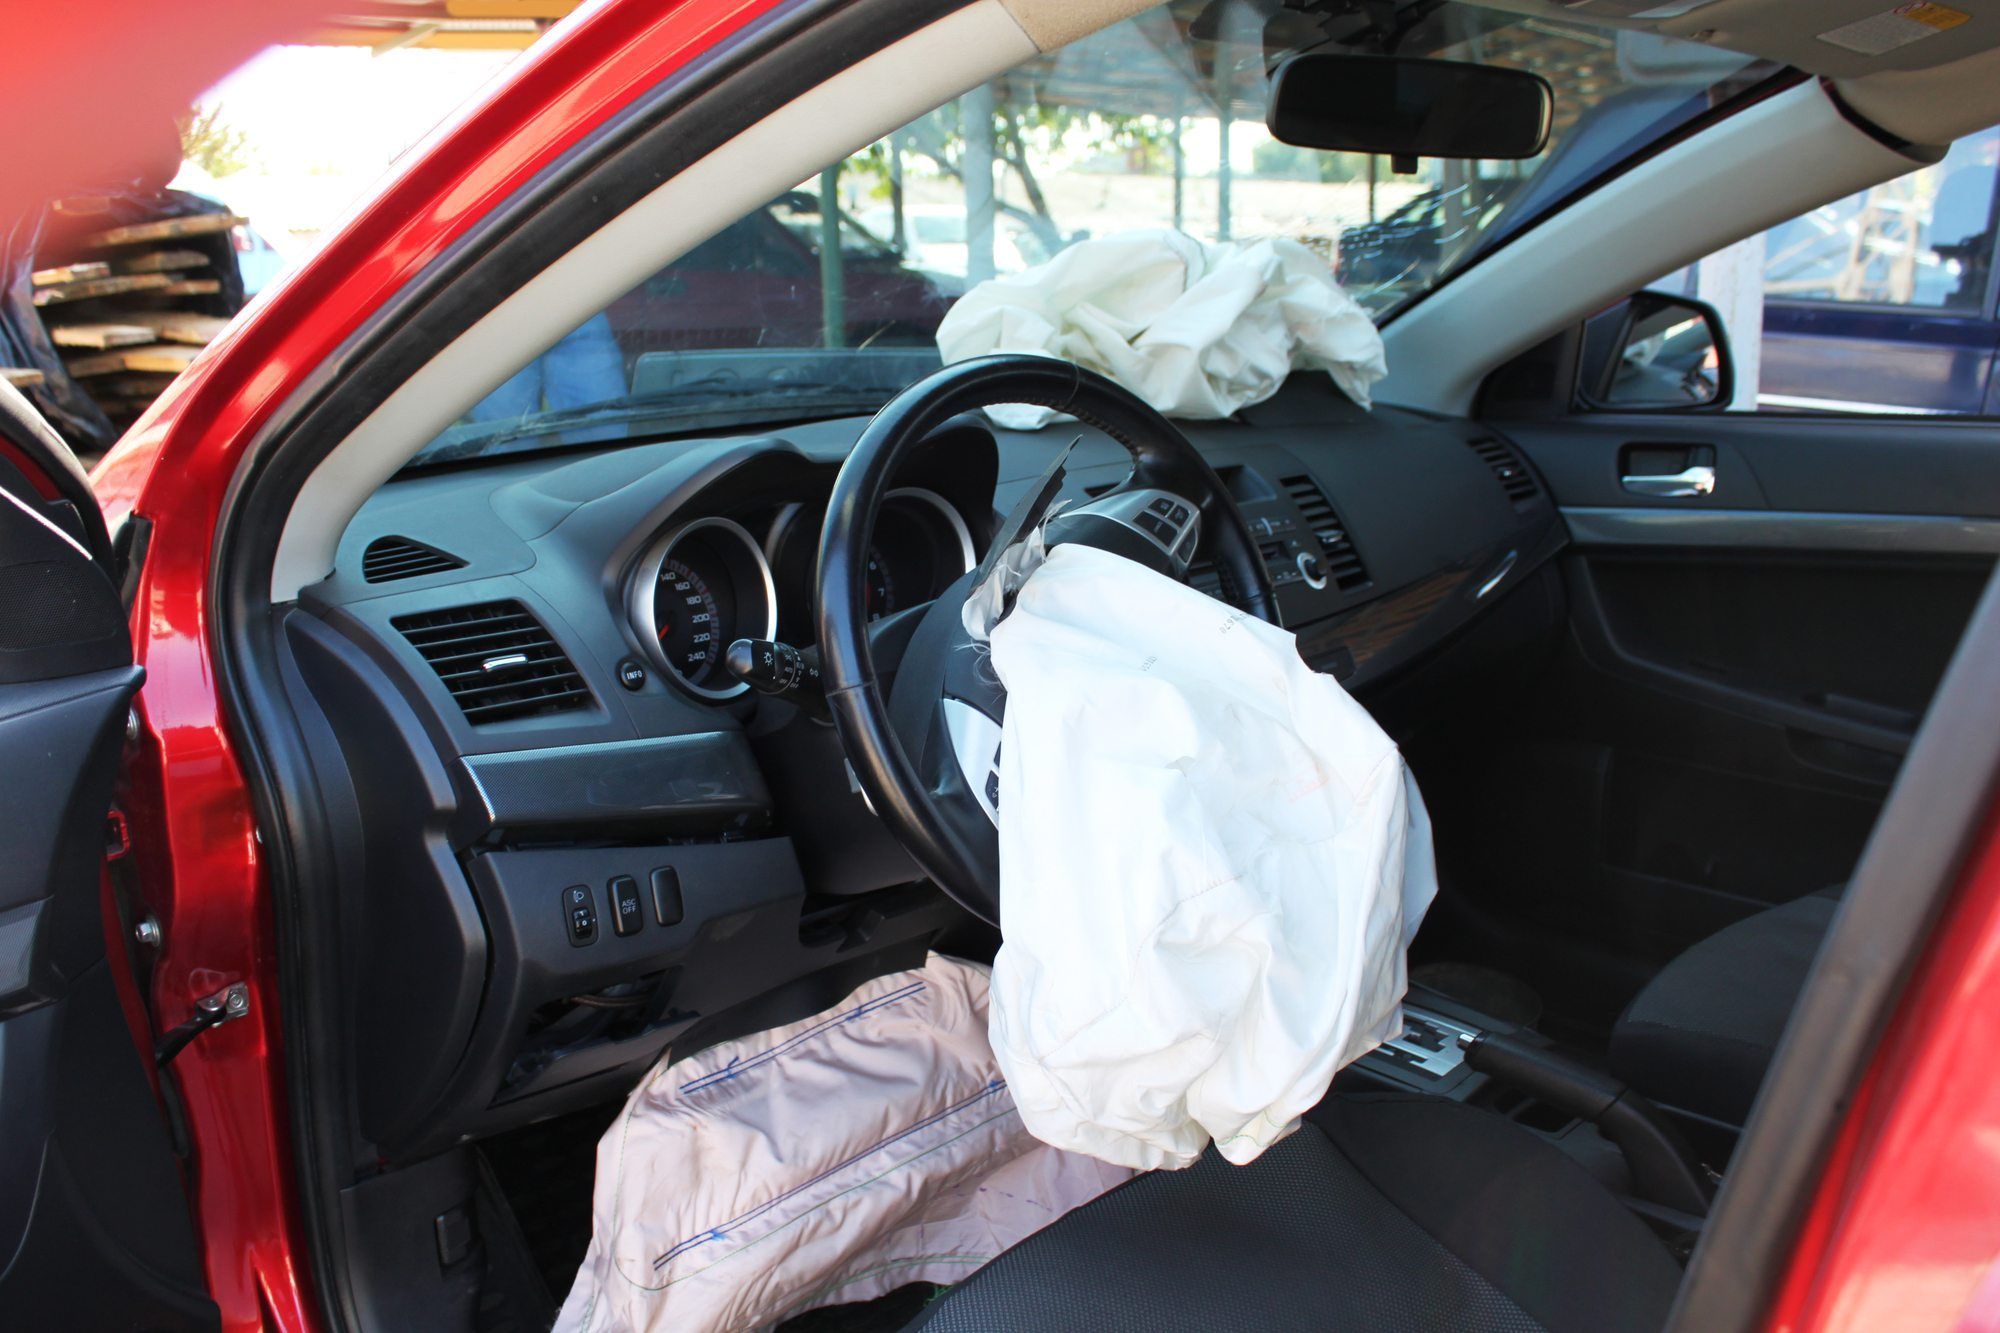 Toyota Takata airbag lawsuit has been filed after a woman was injured after an airbag malfunctioned.